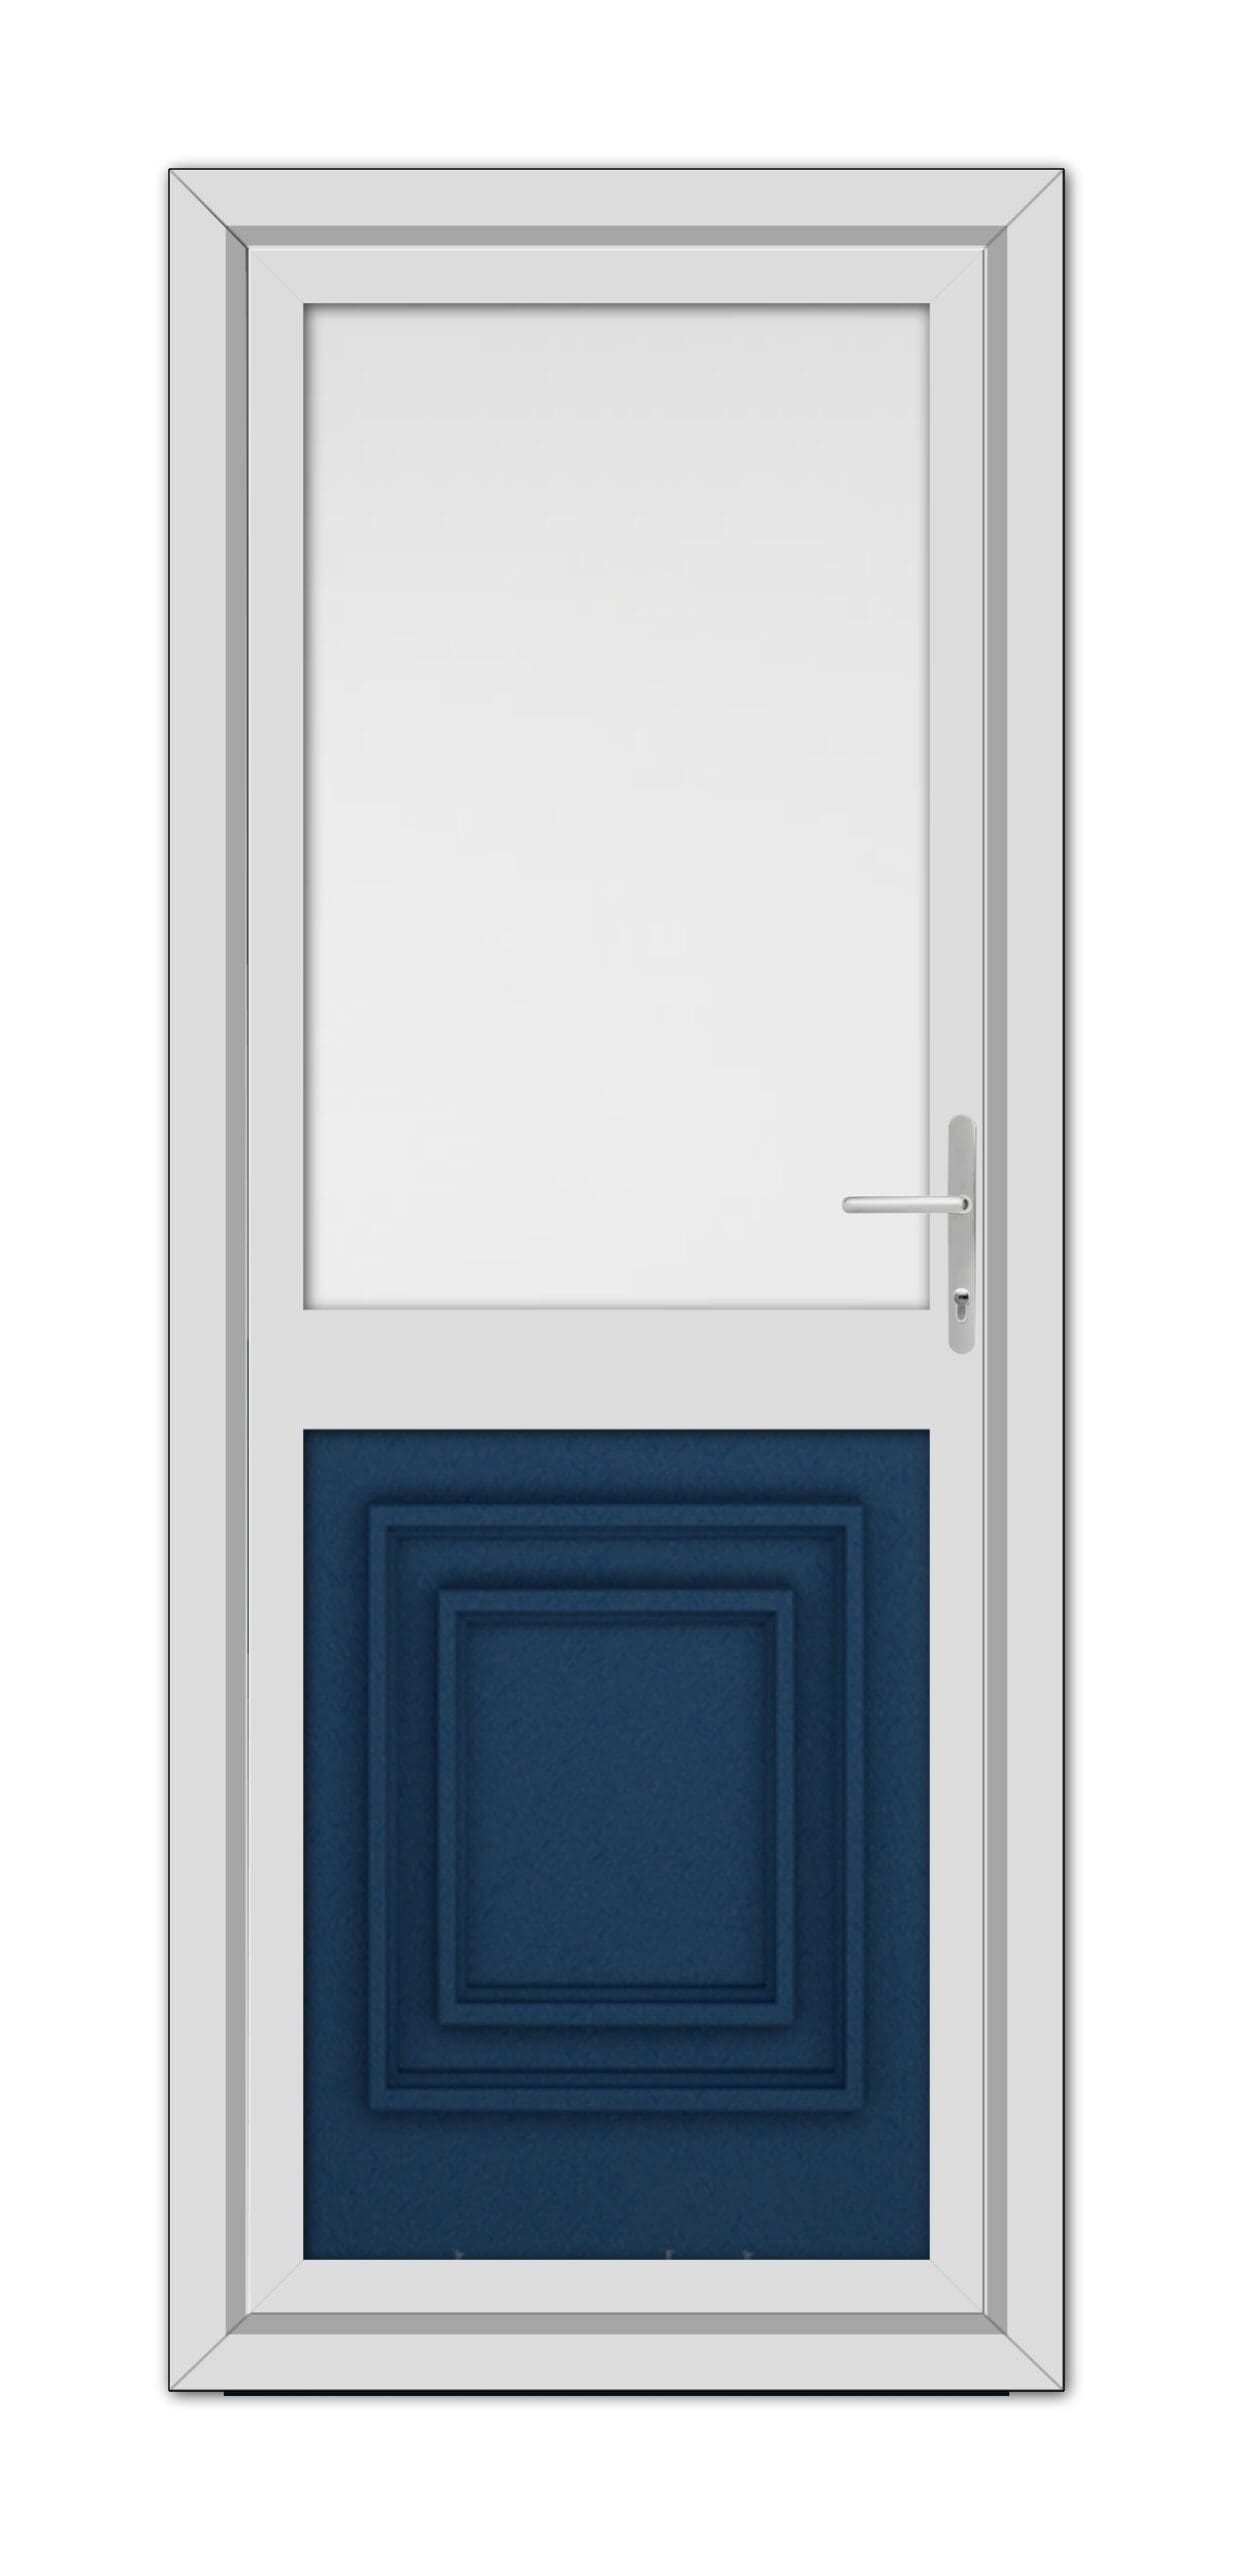 A modern door with a white frame, featuring a top window and a recessed Blue Hannover Half uPVC lower panel, equipped with a metallic handle.